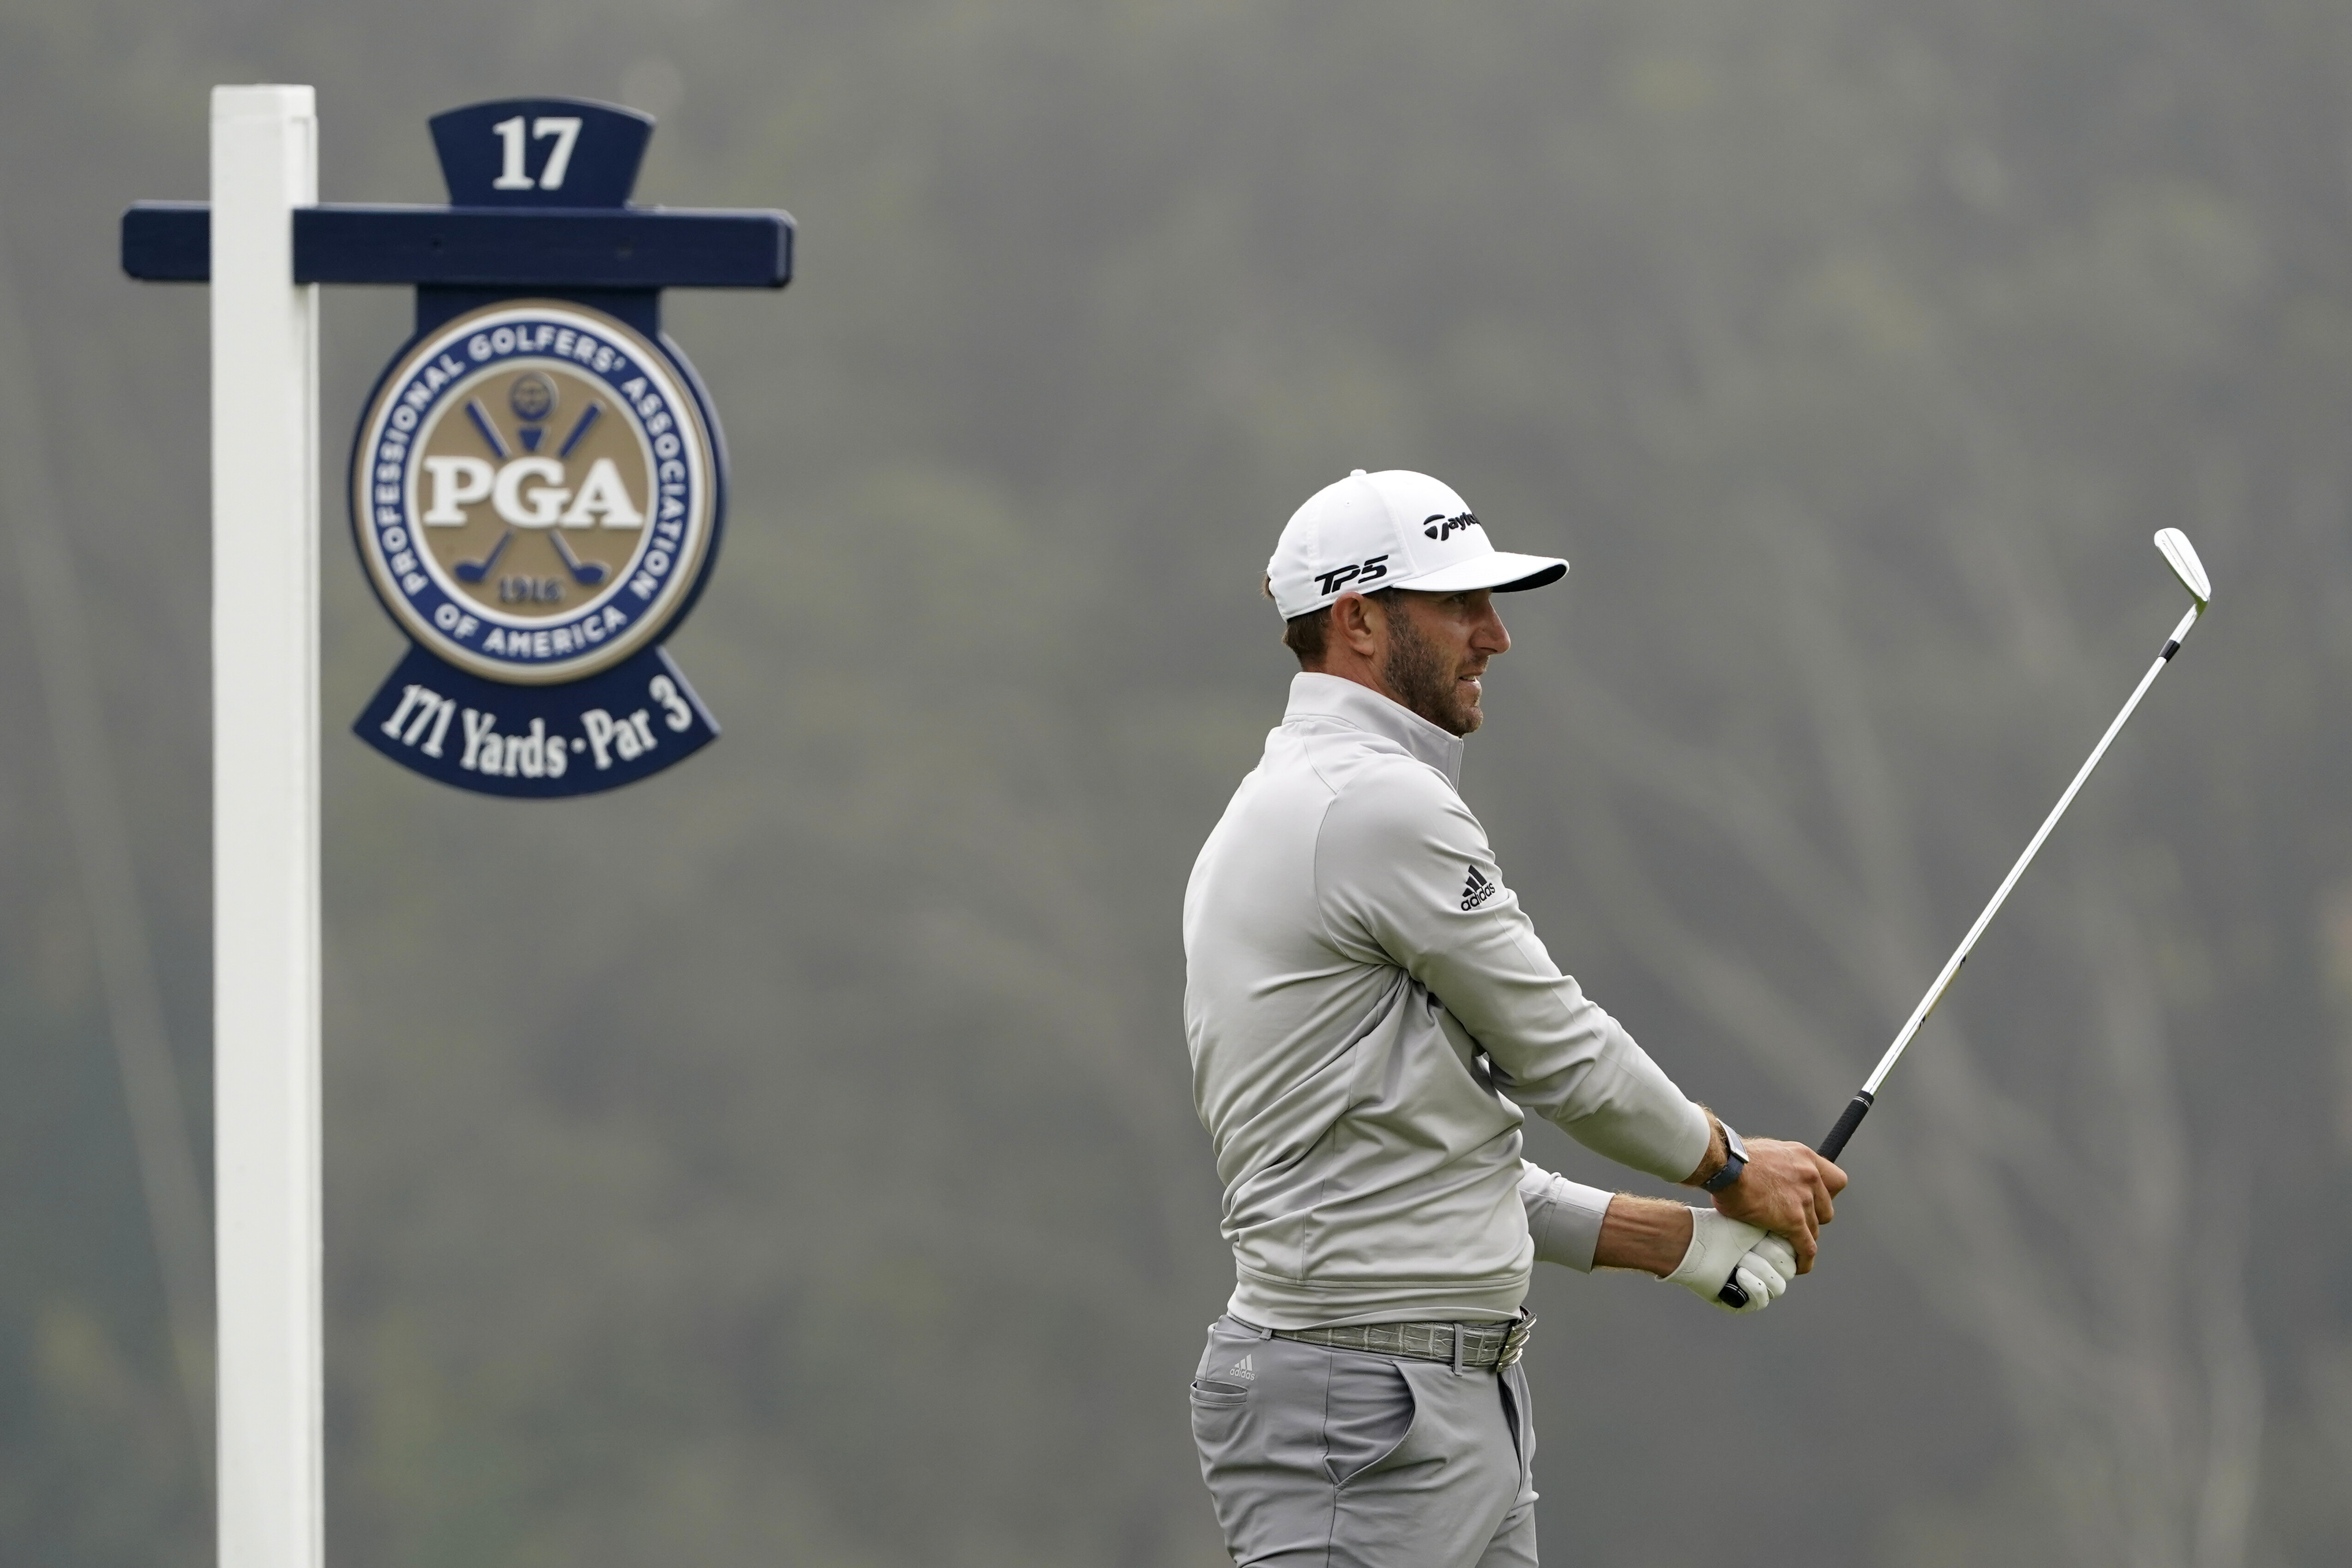 How to watch 2020 Tour Championship Free live stream, TV channels for PGA FedEx Cup Playoffs Dustin Johnson, Jon Rahm